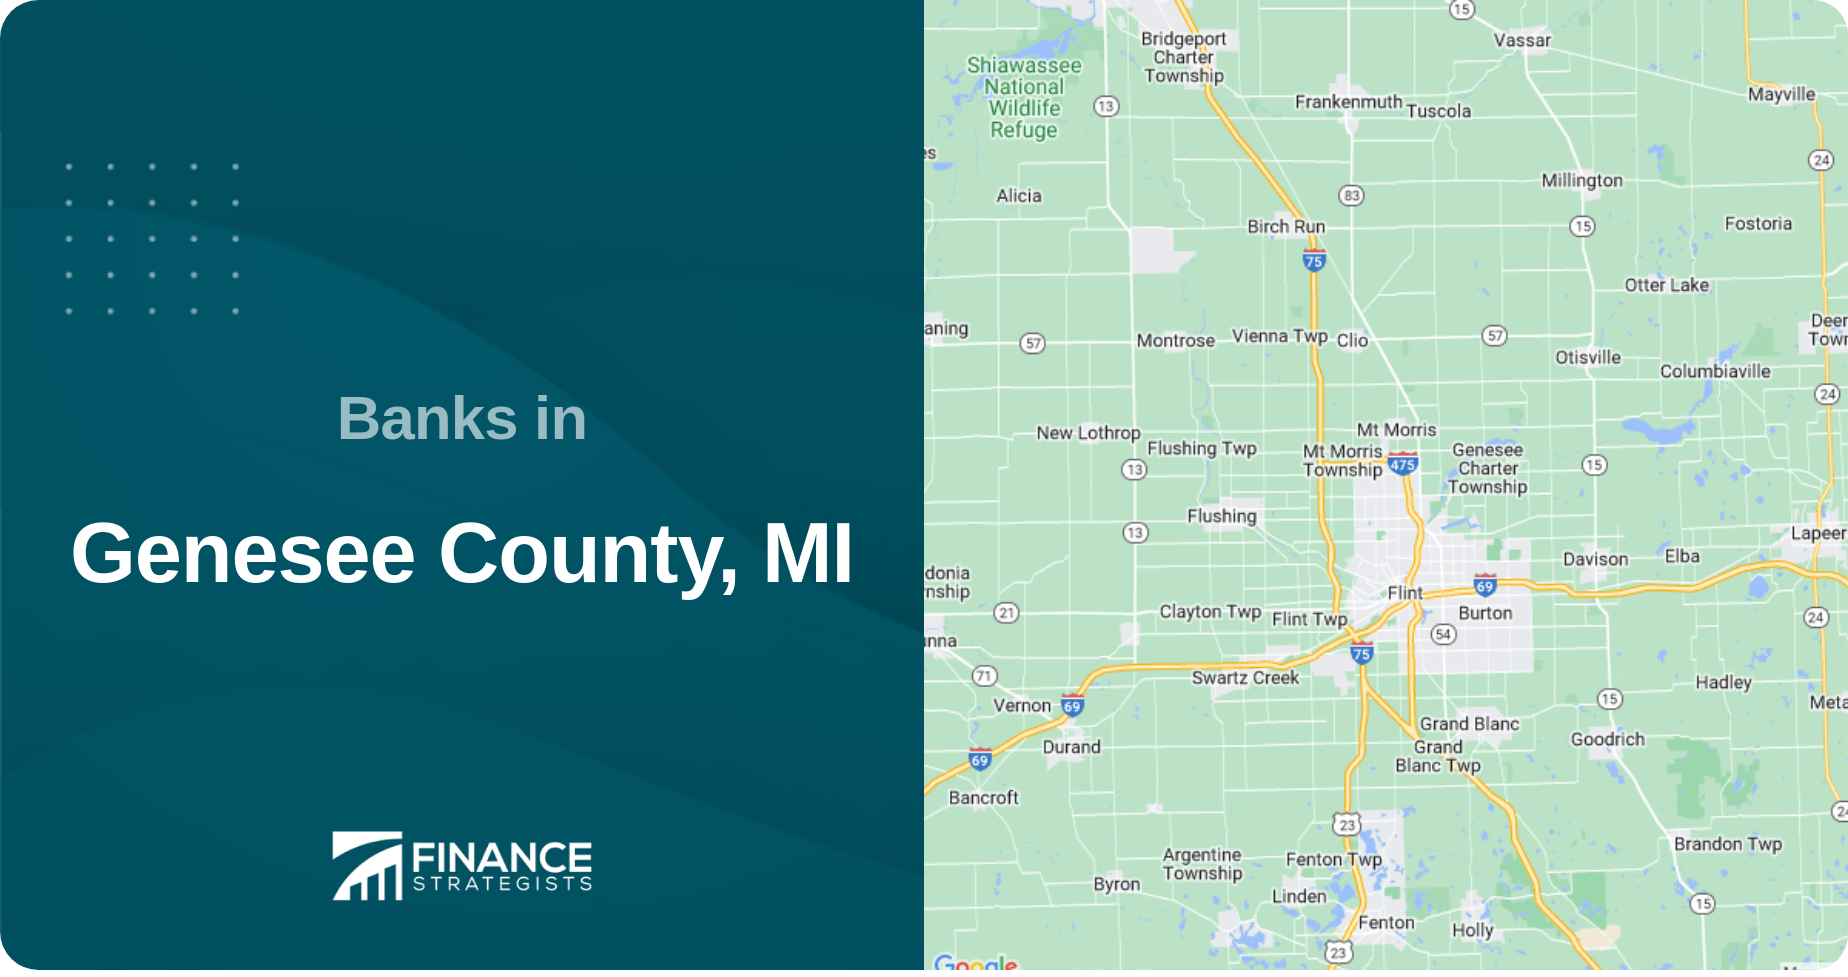 Banks in Genesee County, MI